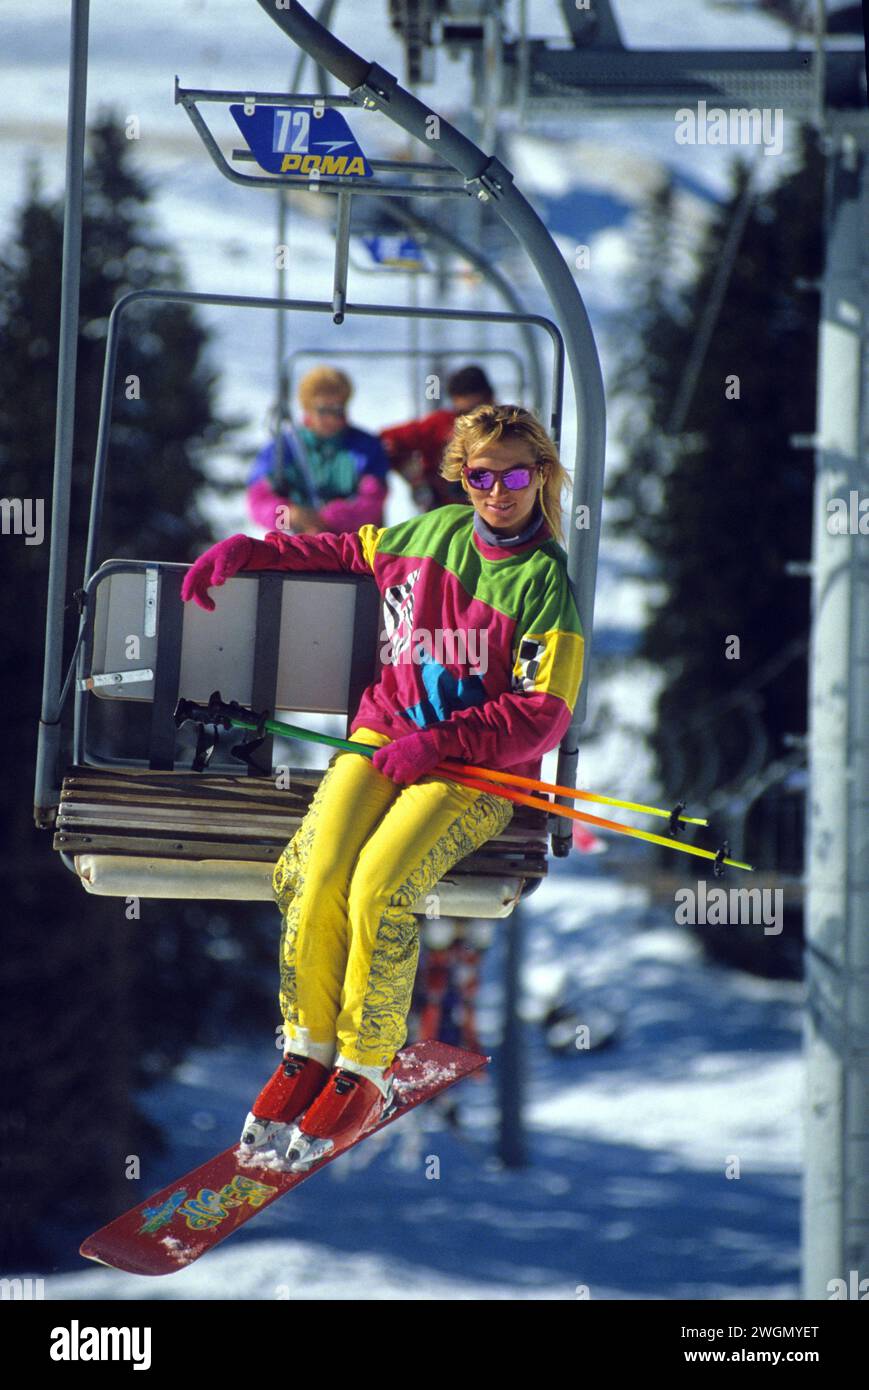 Sport SKI pretty blond hair young woman sit down ski lift snow winter forest background healthy good looking Stock Photo